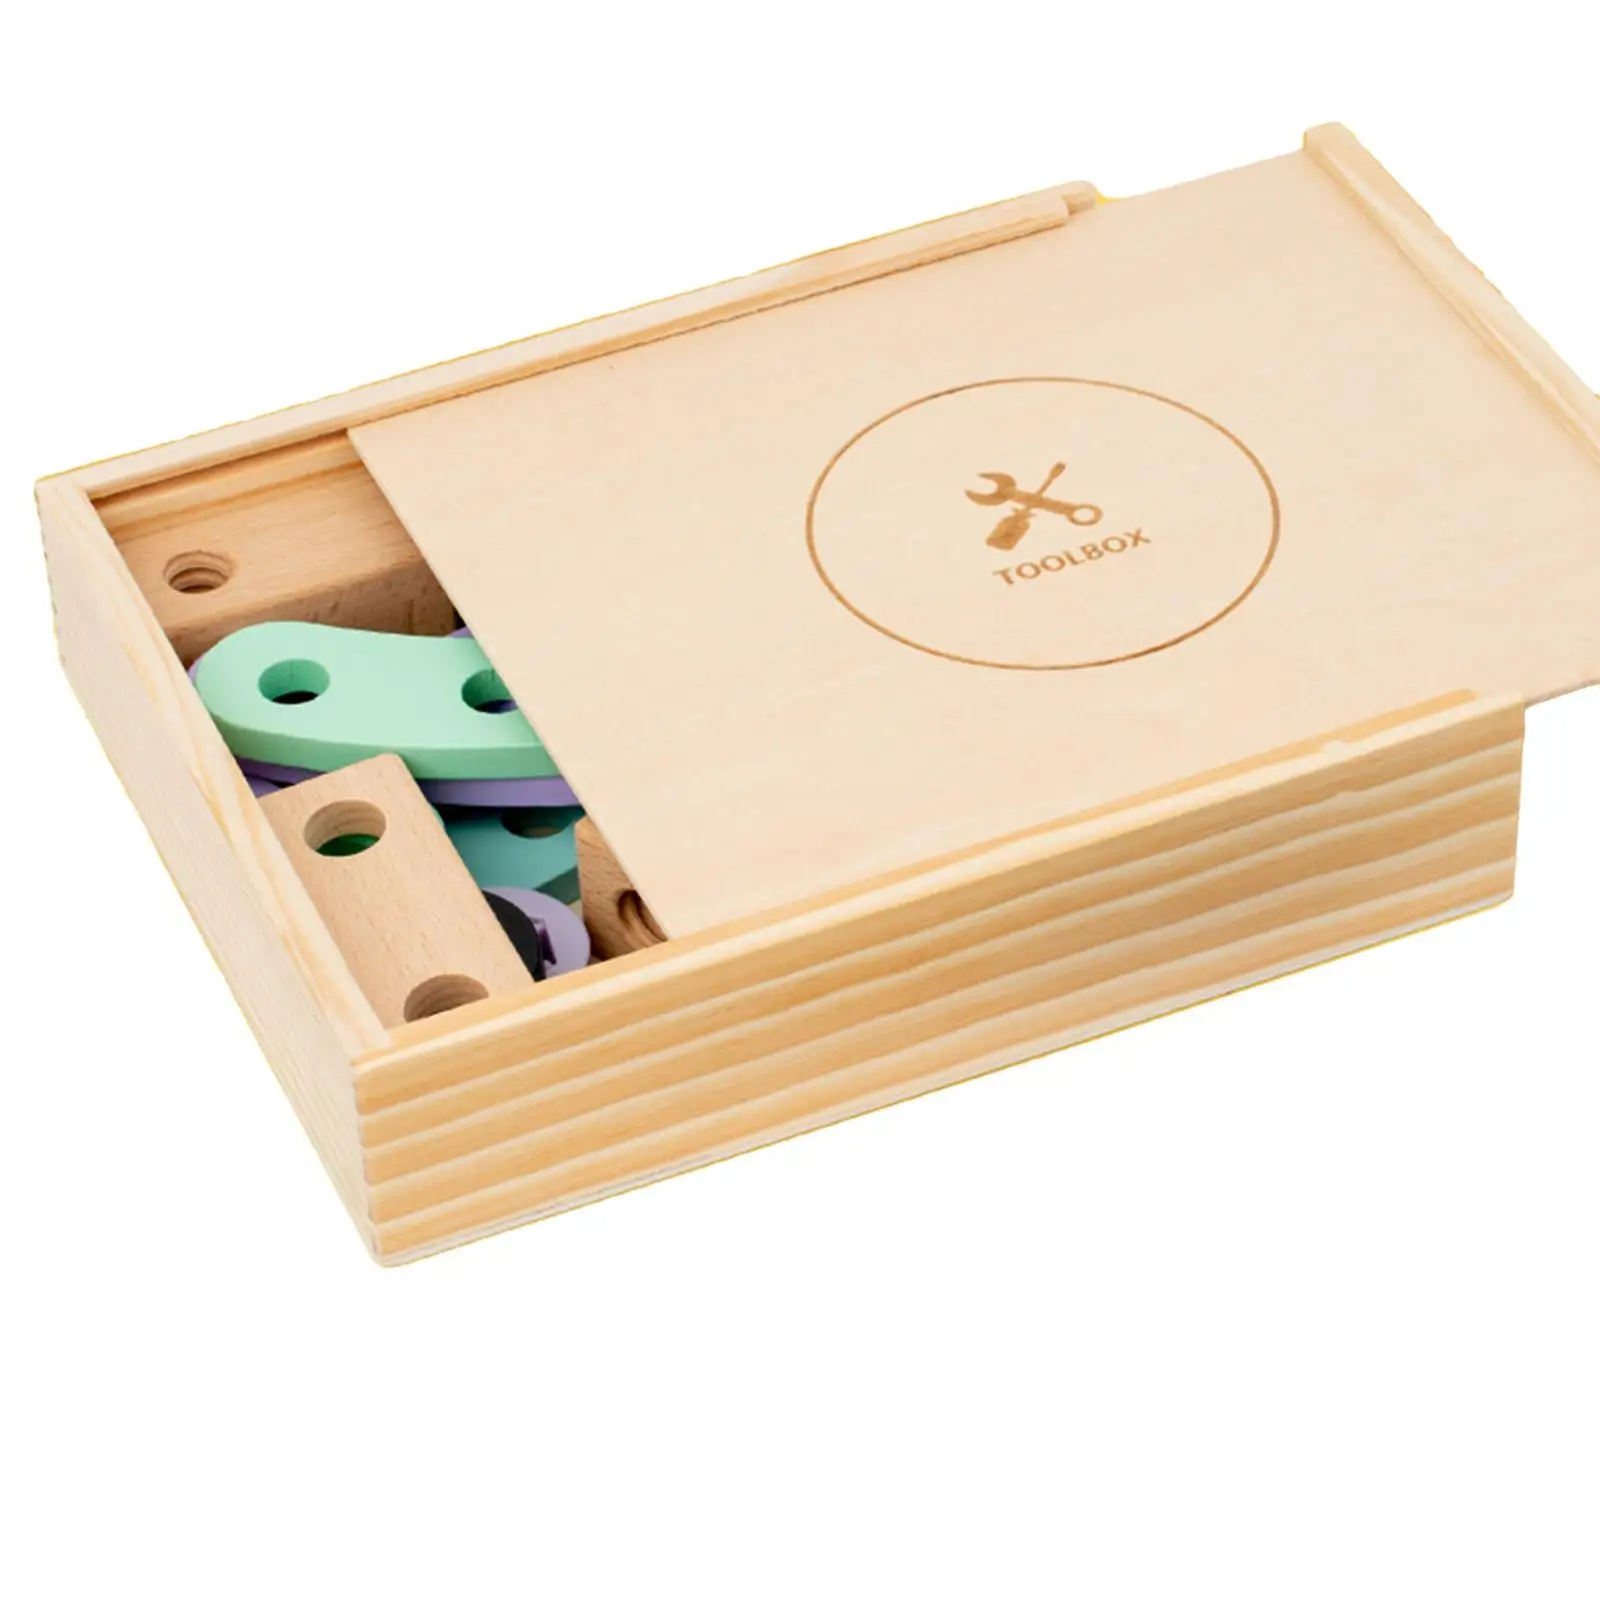 Wooden Repair Tool Box Toy DIY Multifunctional Creative Birthday Gifts Stem Learning Toys Montessori for Children Teens